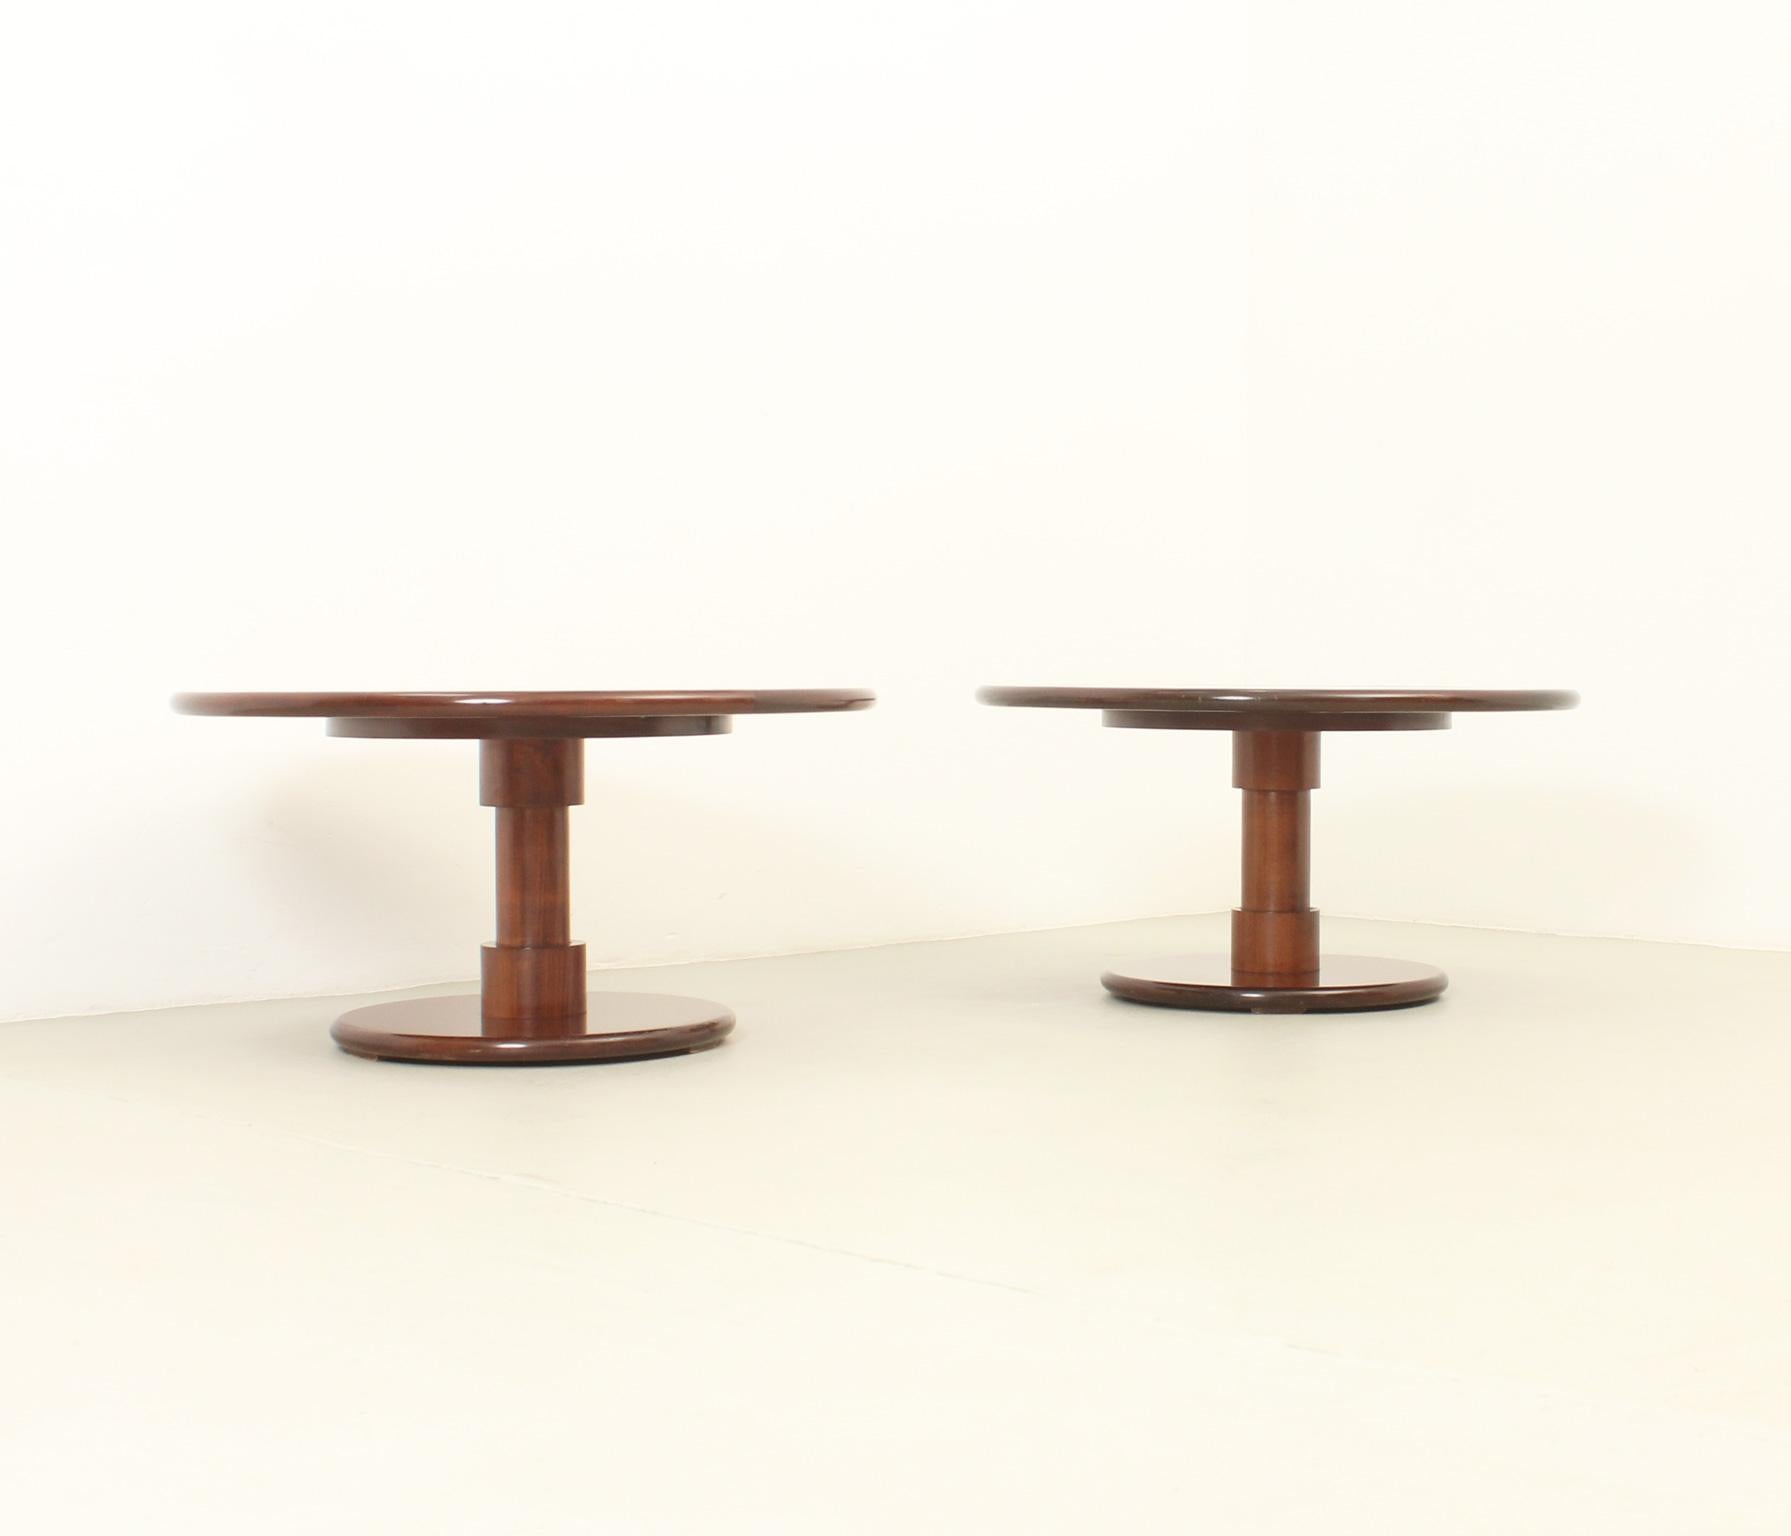 Pair of Coffee or Side Tables by Spanish Architects Correa & Milá, 1960's For Sale 5